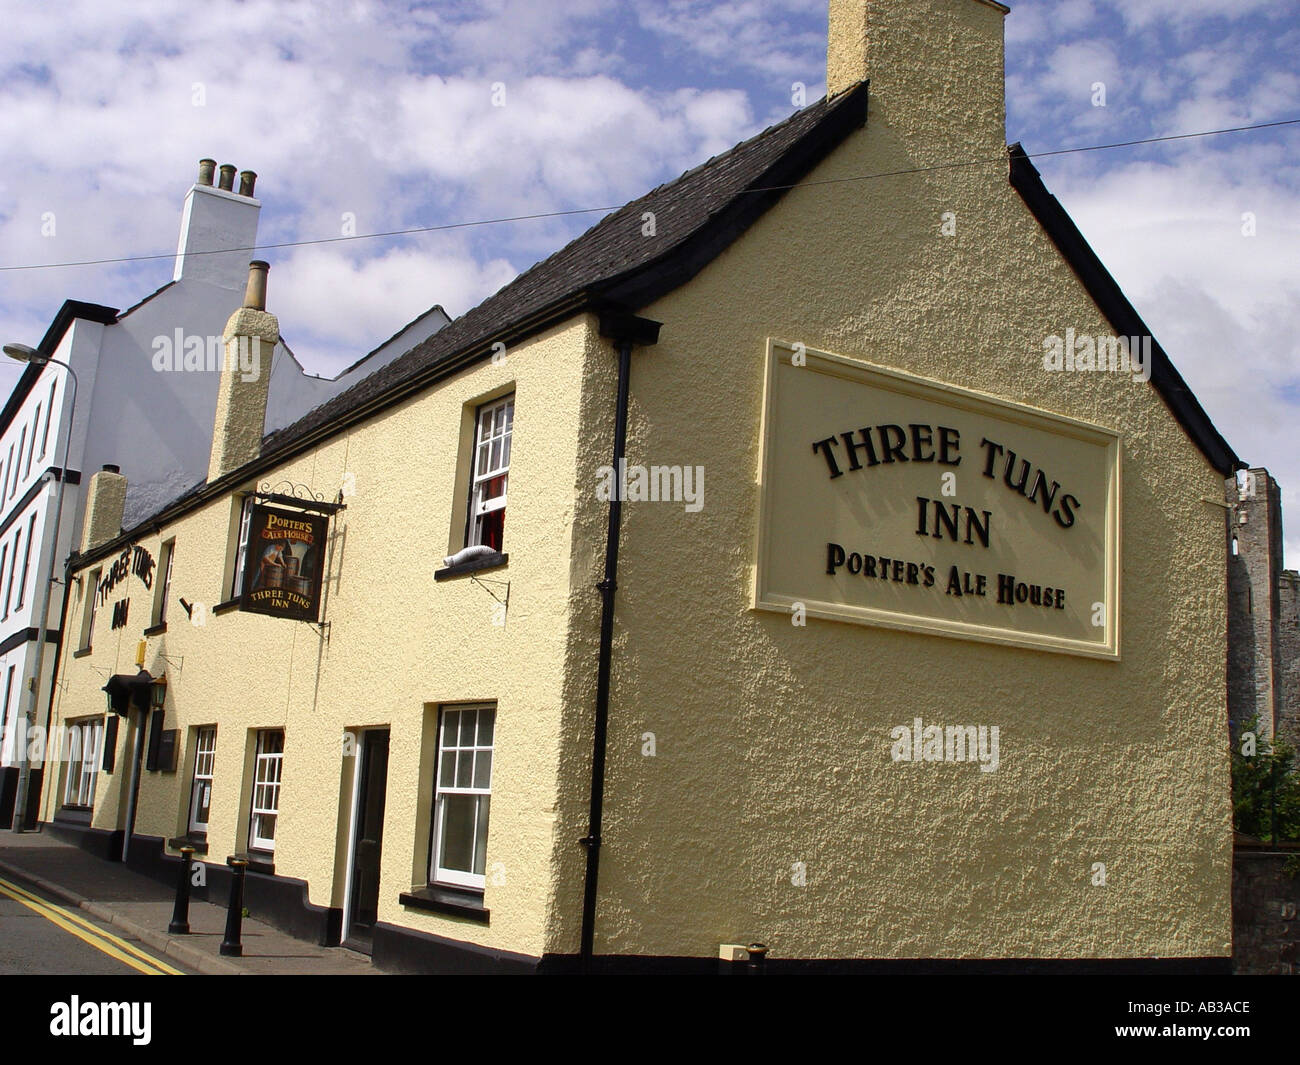 The Three Tuns Inn and Public House in the border town of Chepstow Monmouthshire South Wales GB UK 2003 Stock Photo